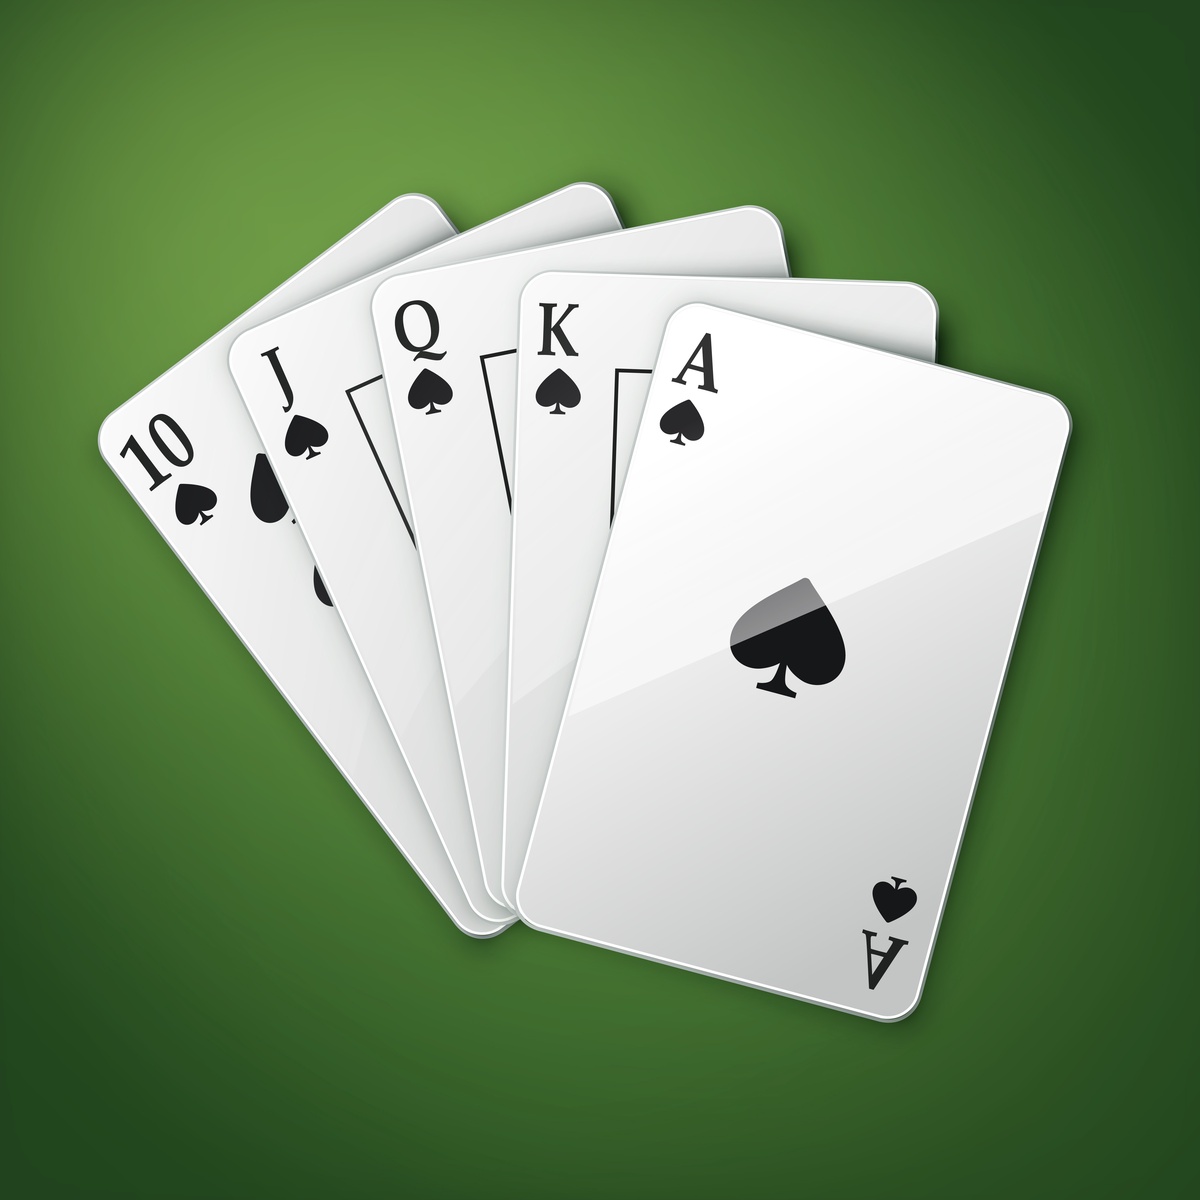 Common Mistakes to Avoid in Rummy Game Development and How to Fix Them